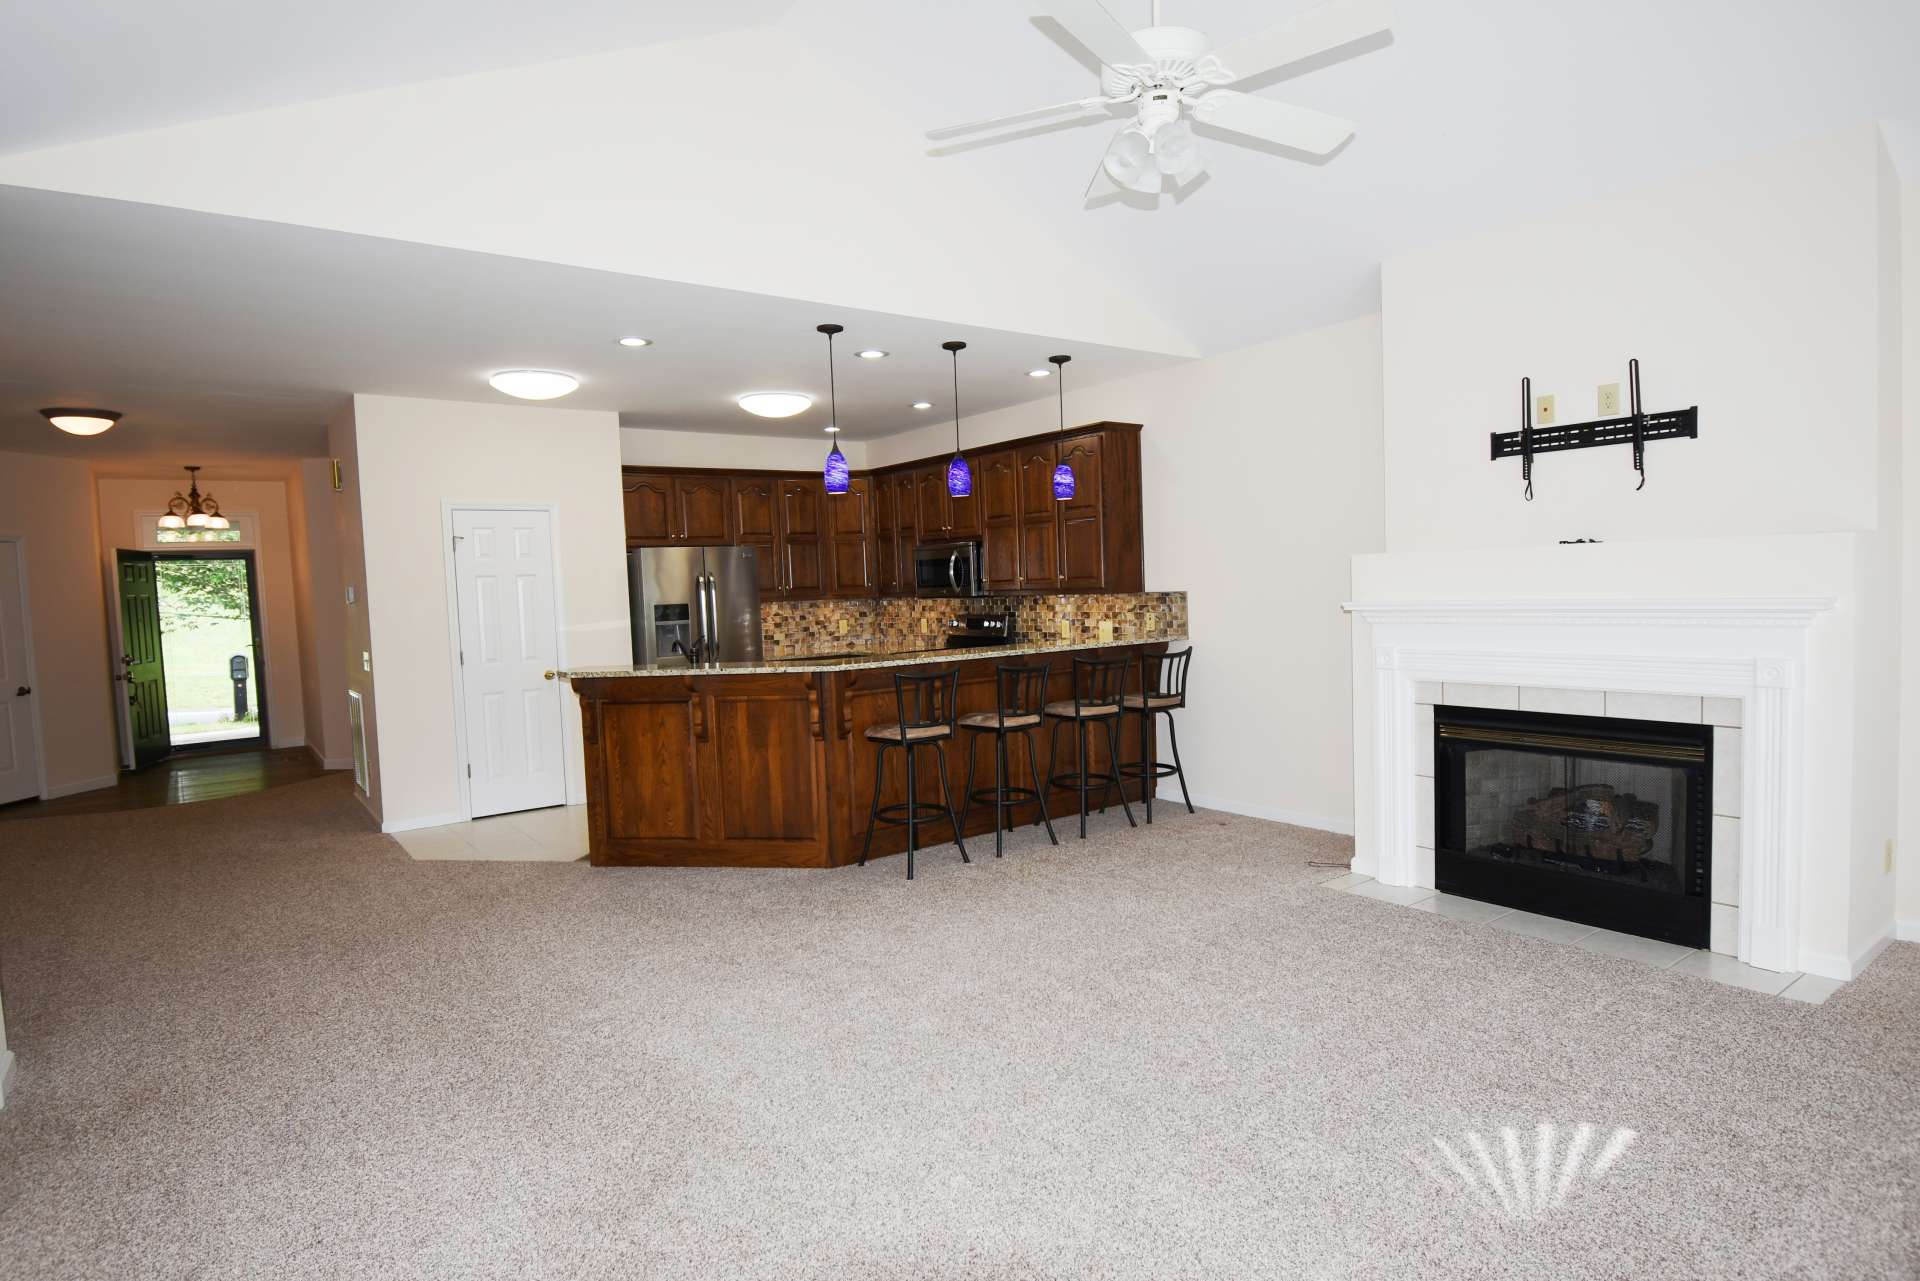 The living, dining, and kitchen areas are open to each other allowing easy flow when entertaining.